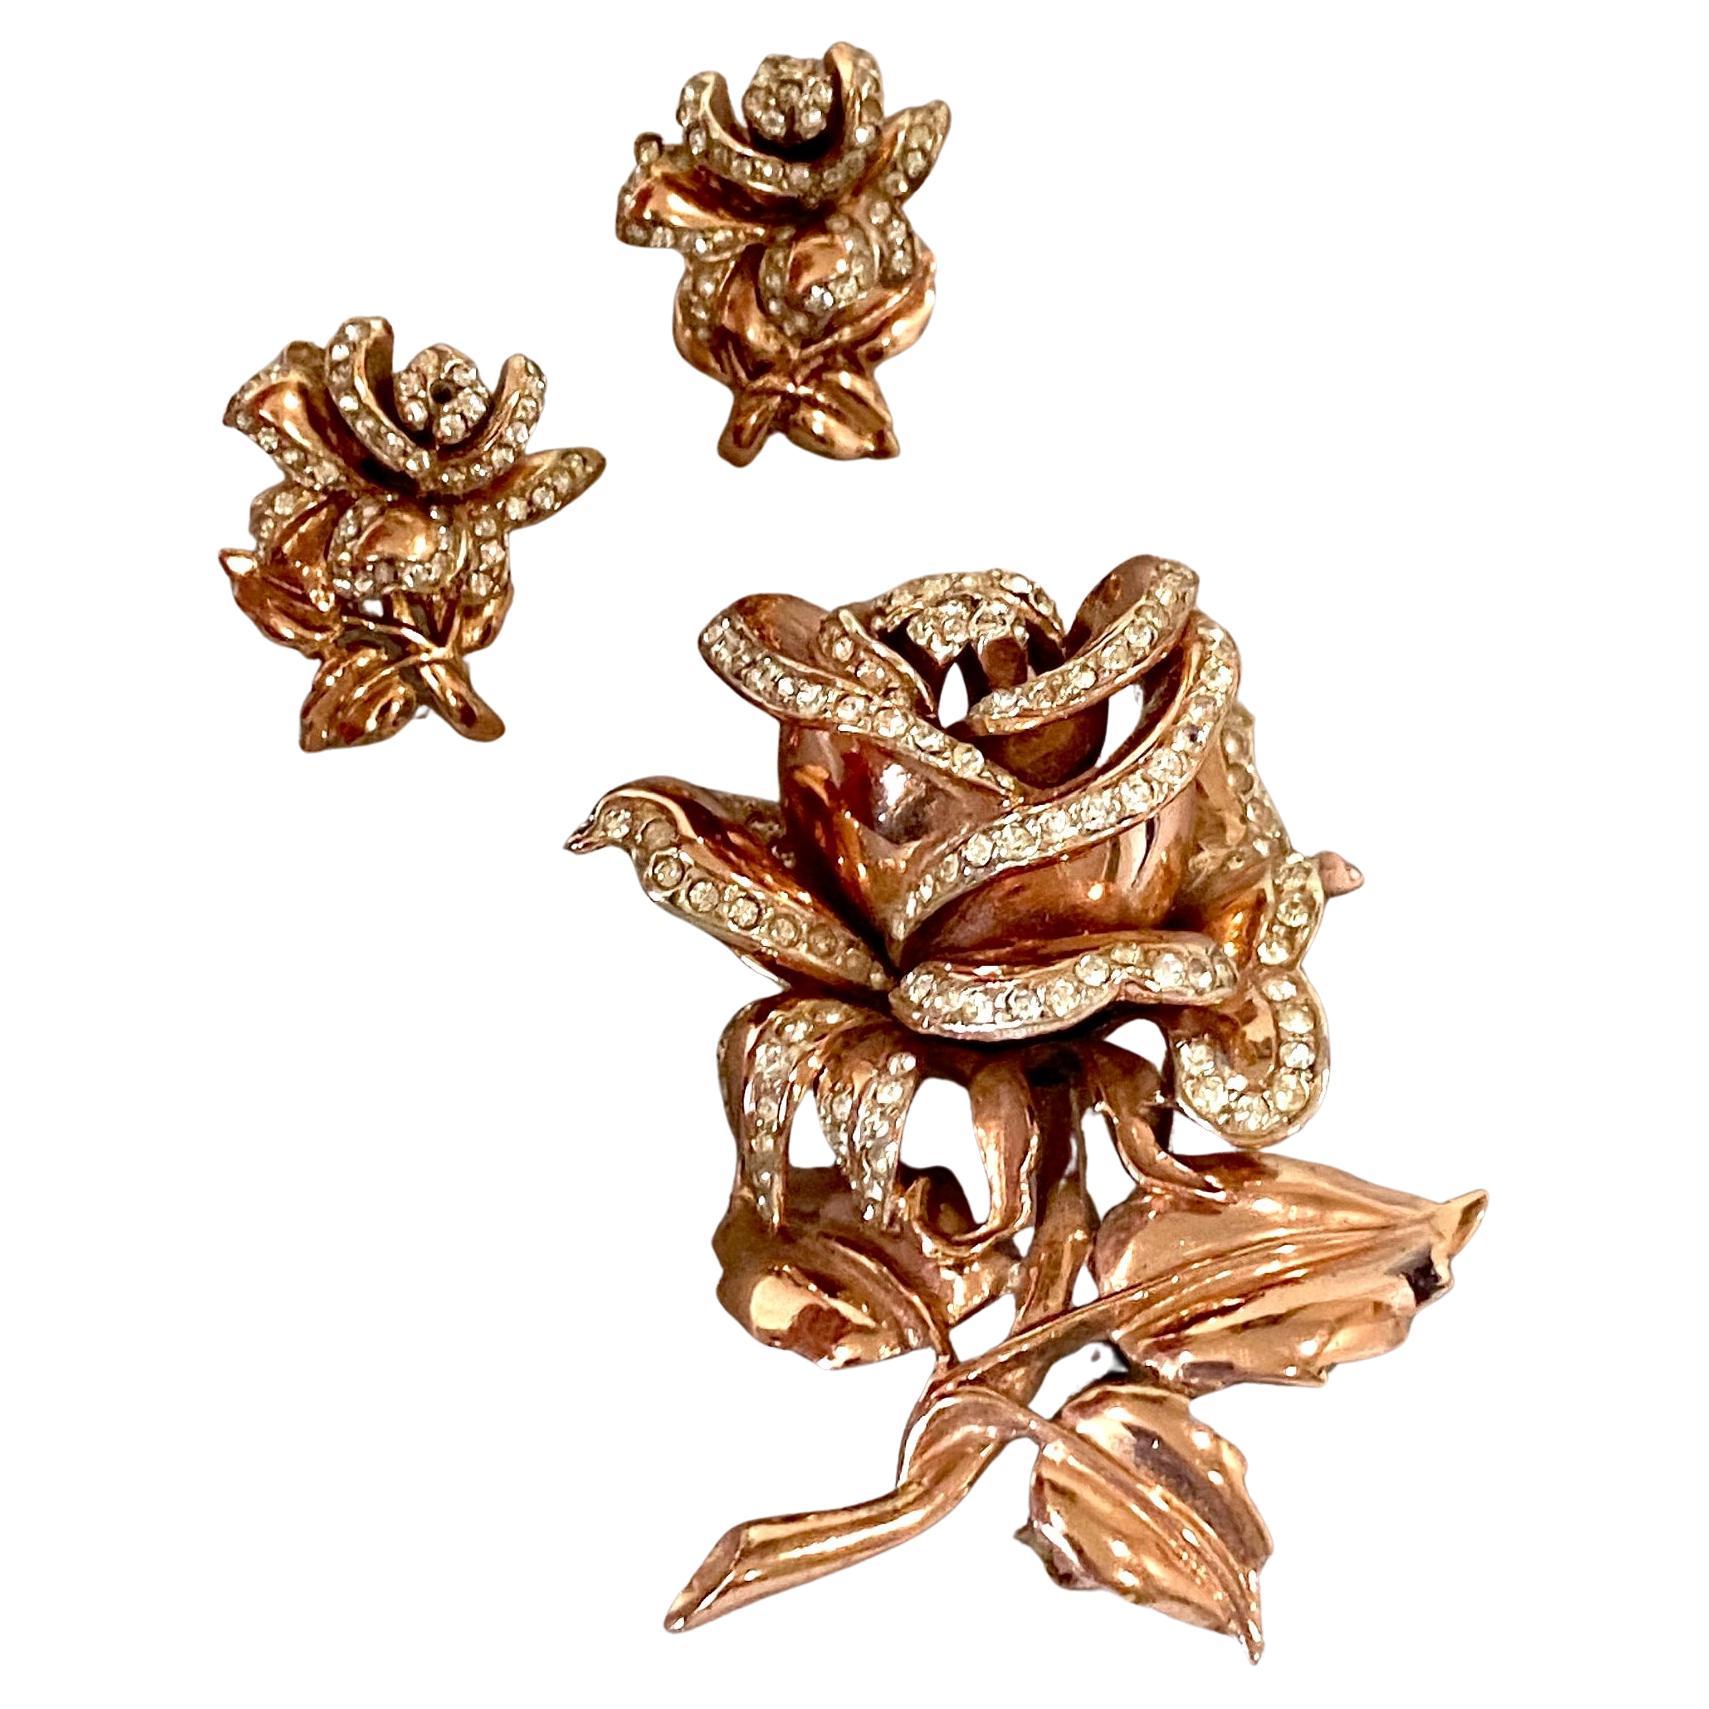 Coro Craft 1940 Rose Gold & Sterling Silver Rose brooch & Earrings, Adolph Katz